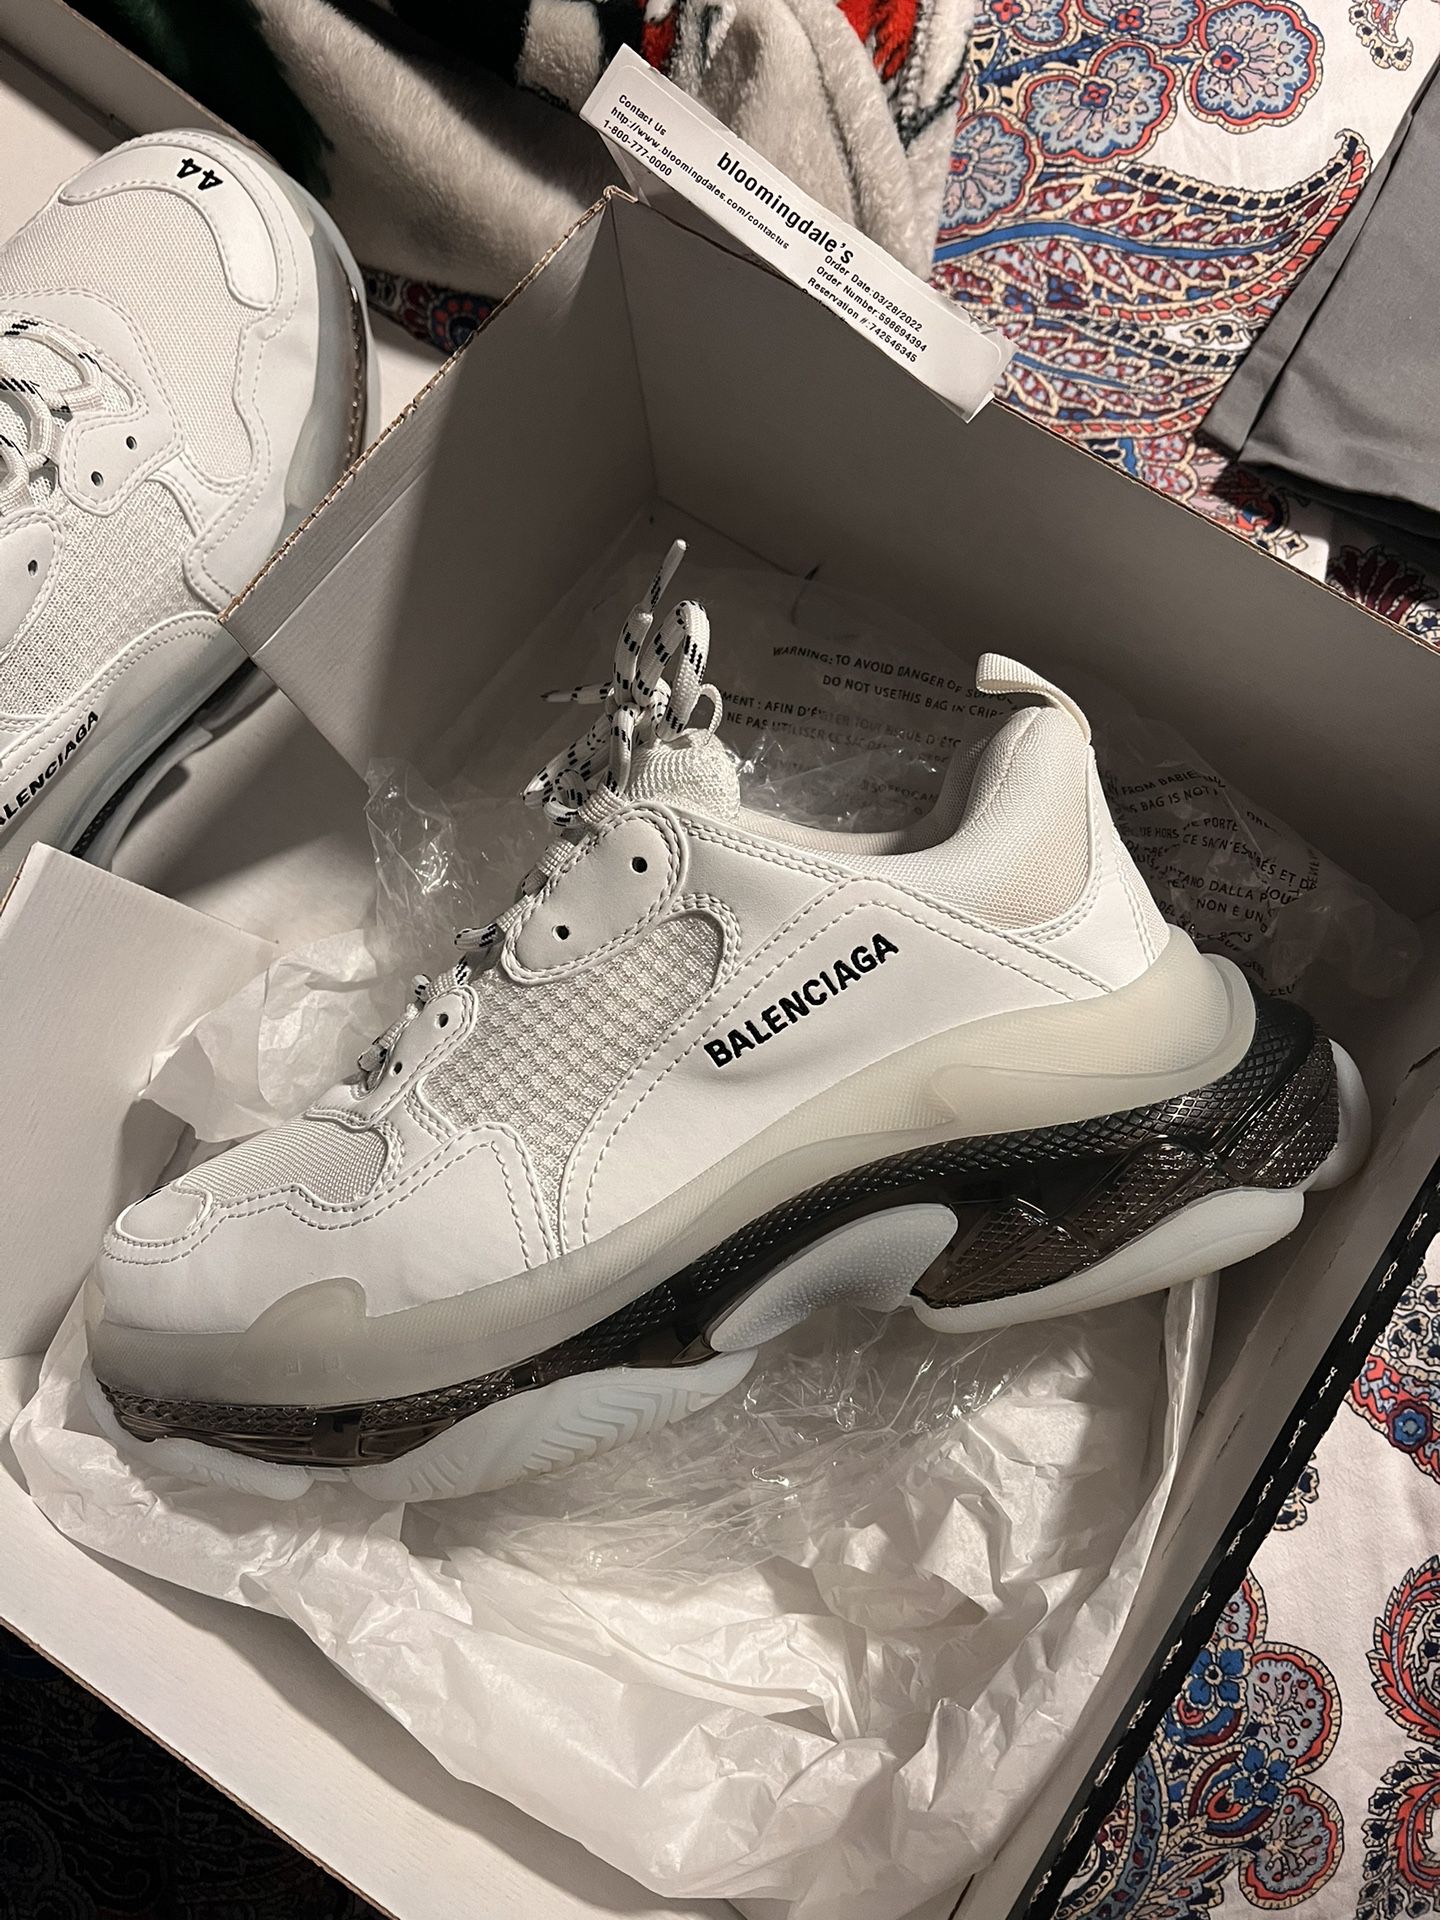 Ud over Forbedring Mos Balenciaga Men Shoes for Sale in Davenport, FL - OfferUp